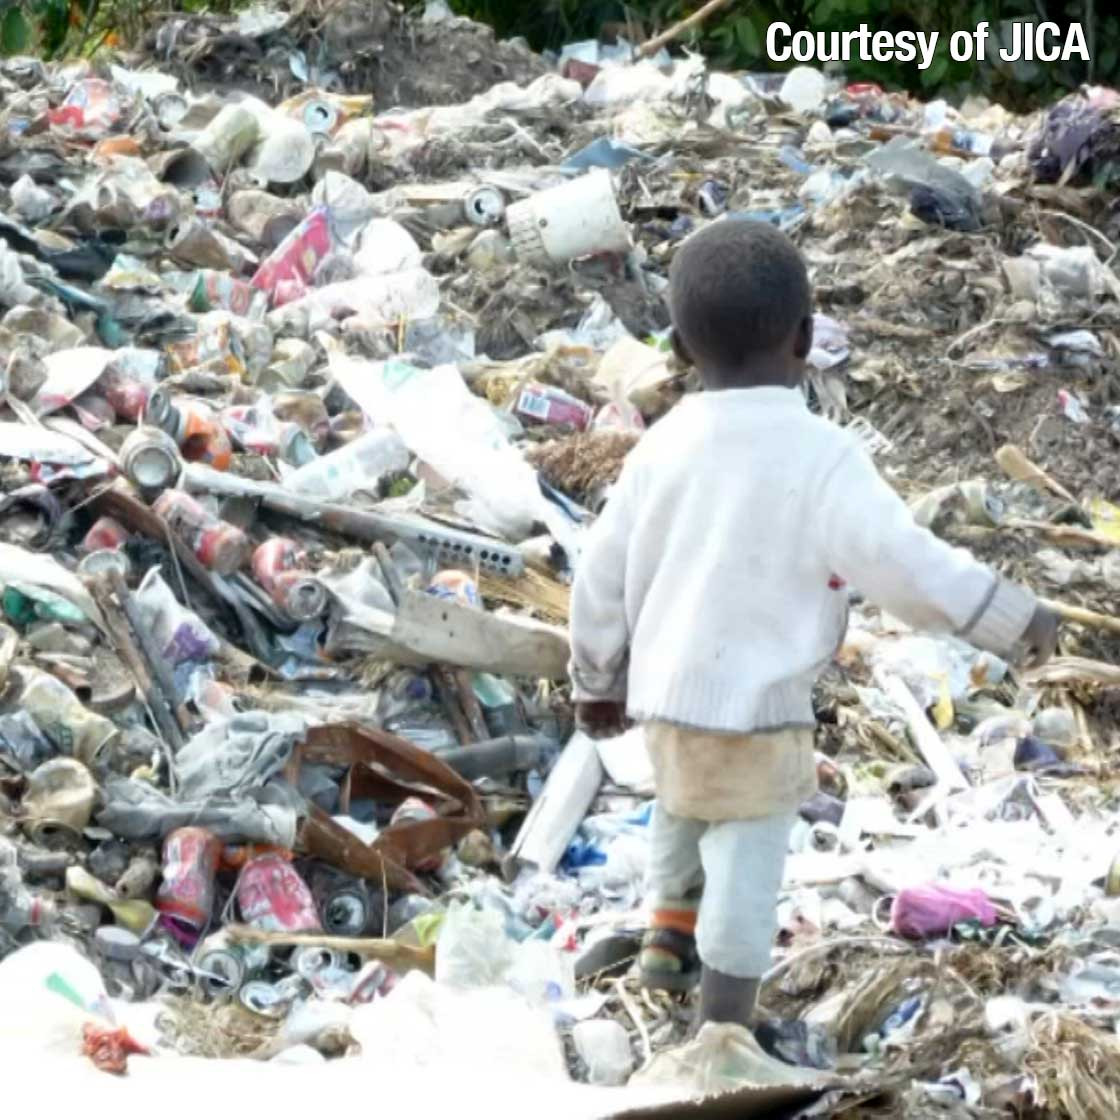 Kenya and Japan look to bug-based solutions to reduce waste